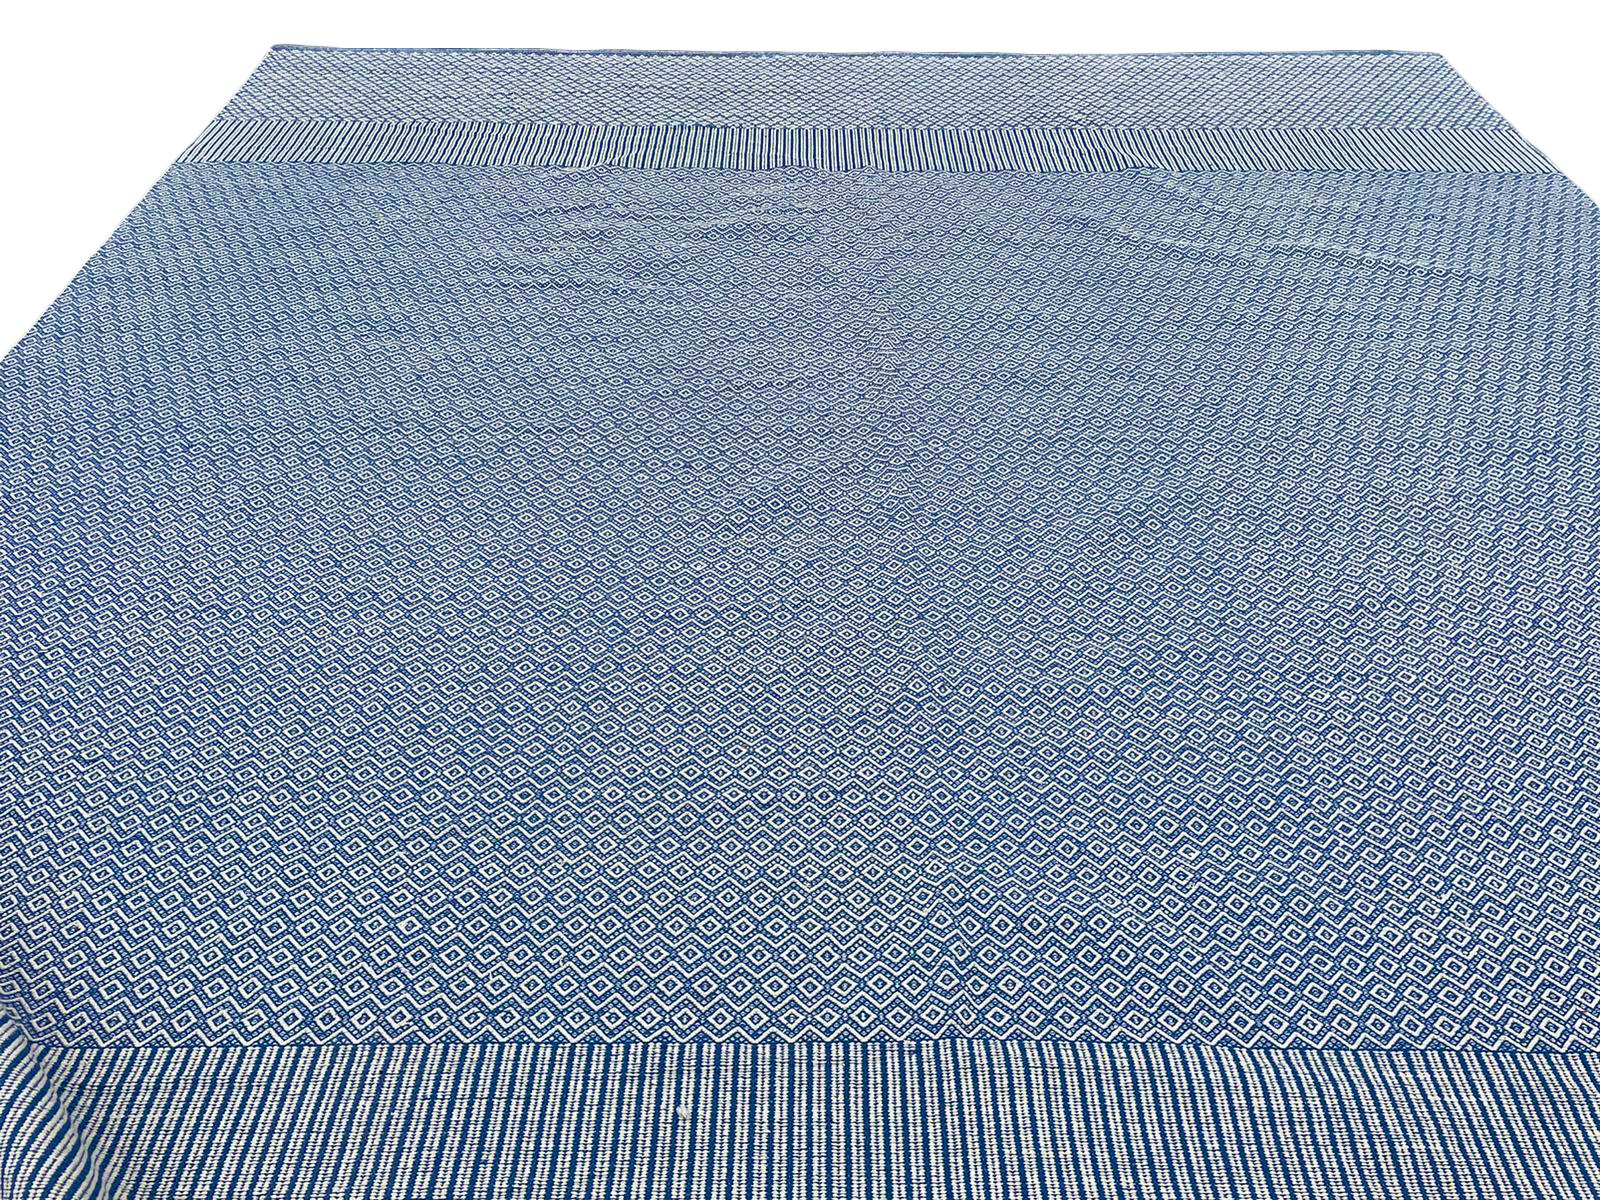 Oversized Blue and White Flat-Weave Indian Kilim by Gordian Rugs 5